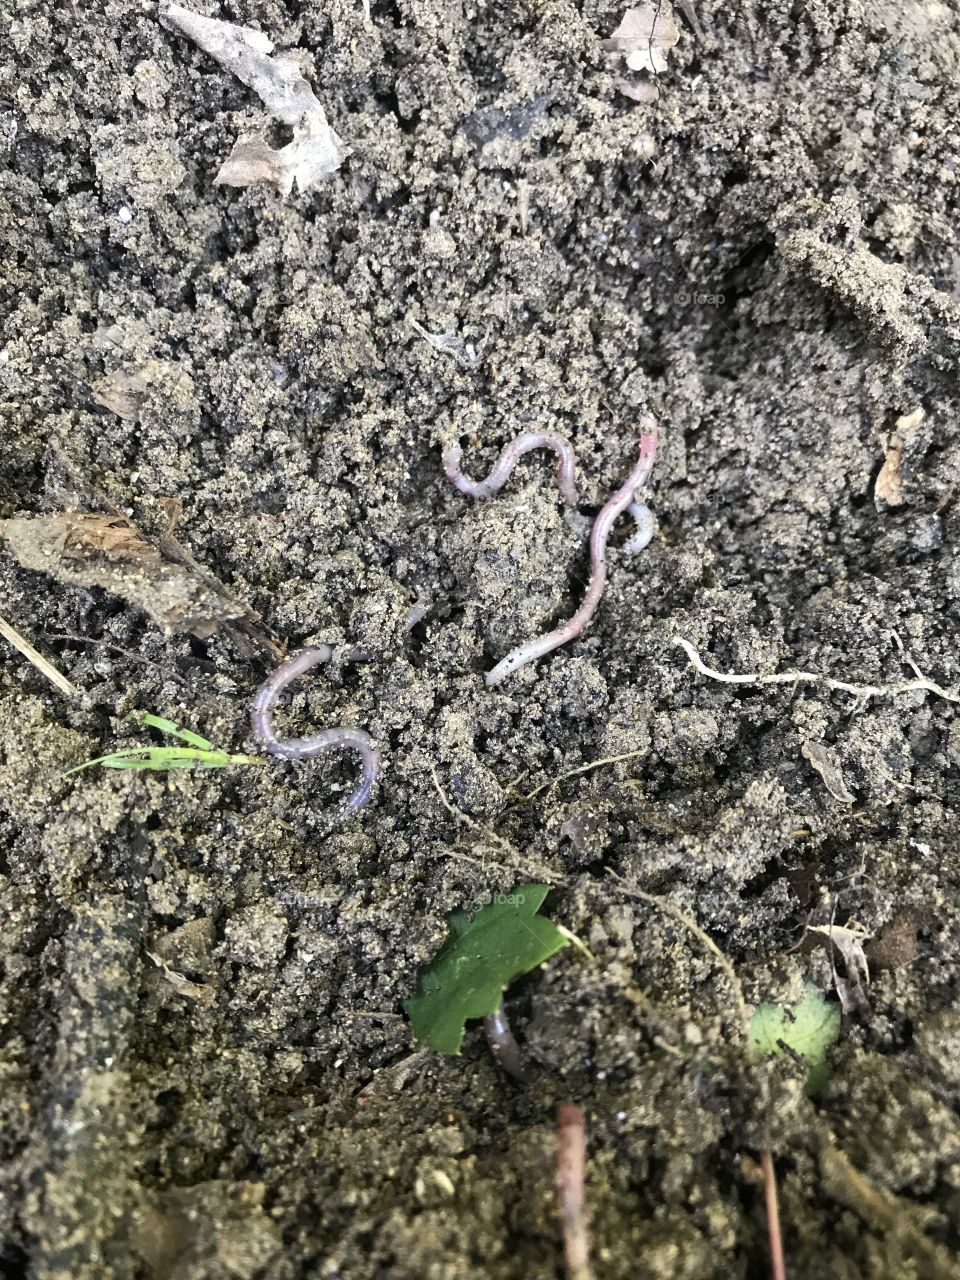 Earth worm party